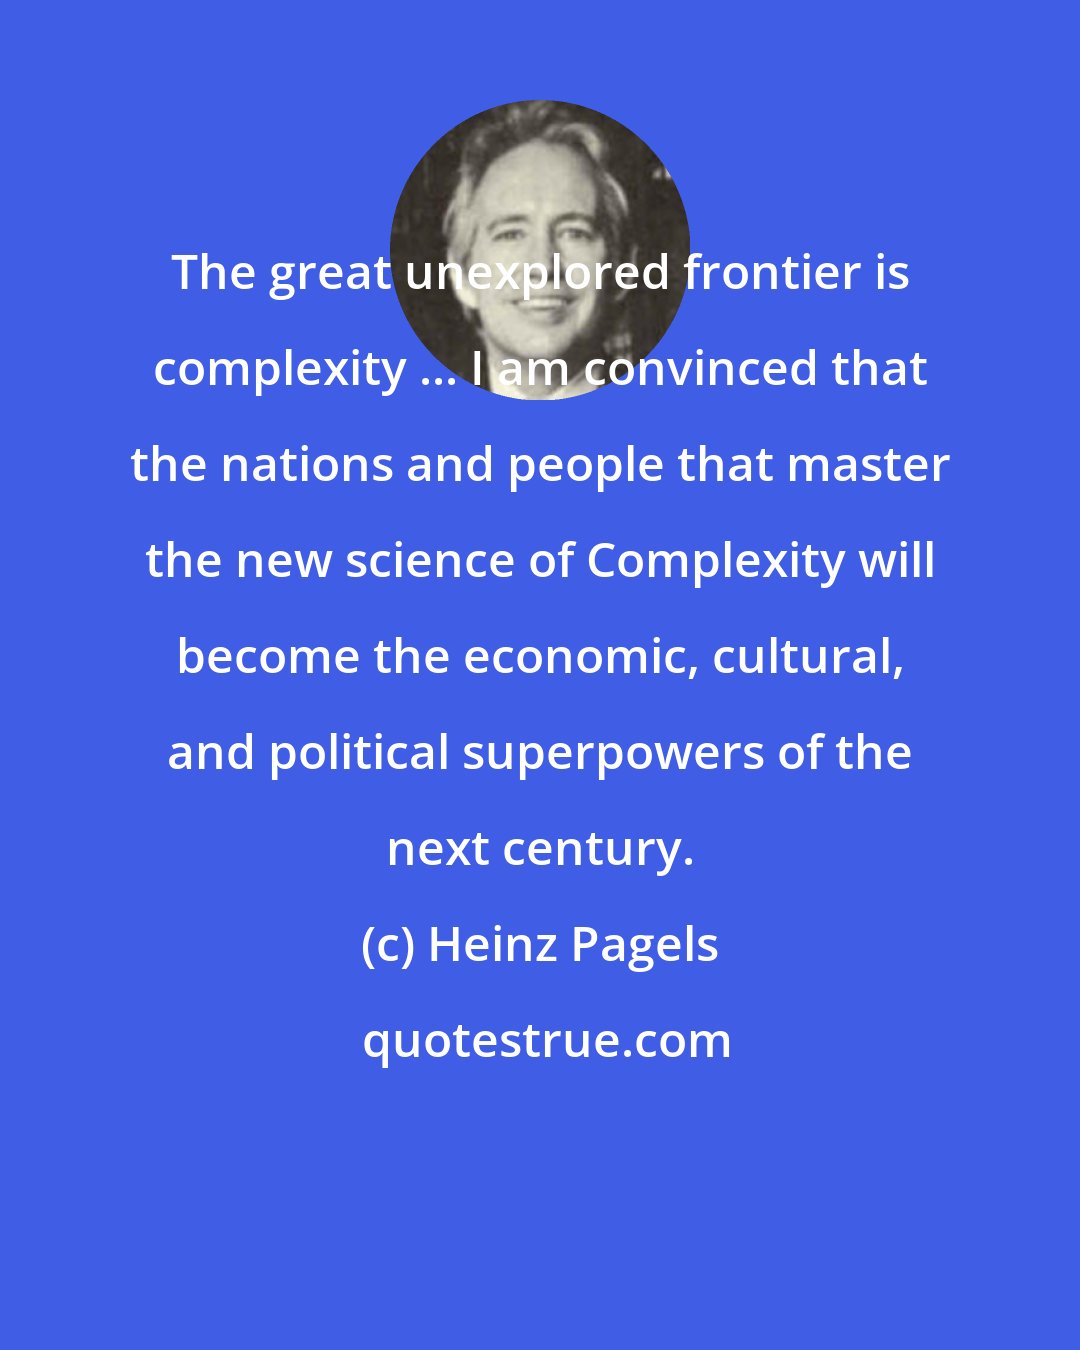 Heinz Pagels: The great unexplored frontier is complexity ... I am convinced that the nations and people that master the new science of Complexity will become the economic, cultural, and political superpowers of the next century.